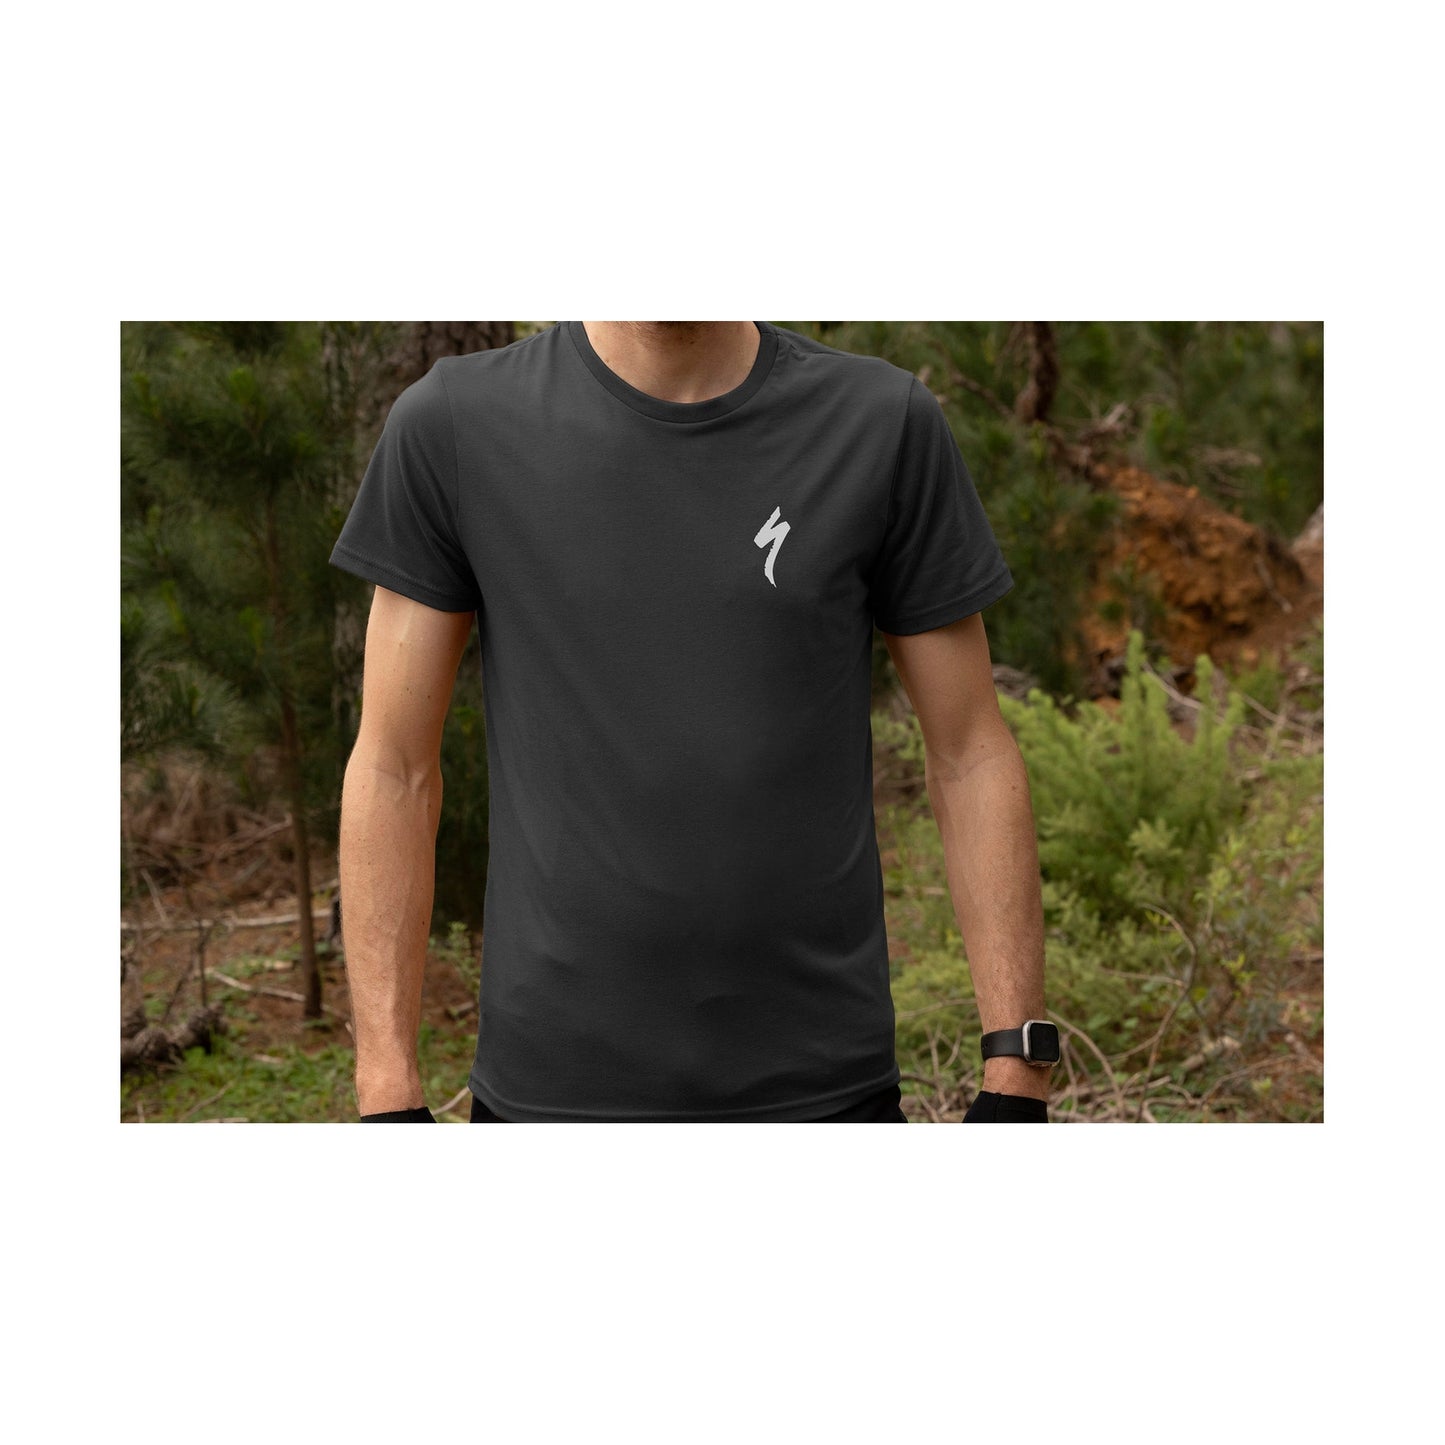 Specialized Podium Tee-Bells-Cycling-Specialized